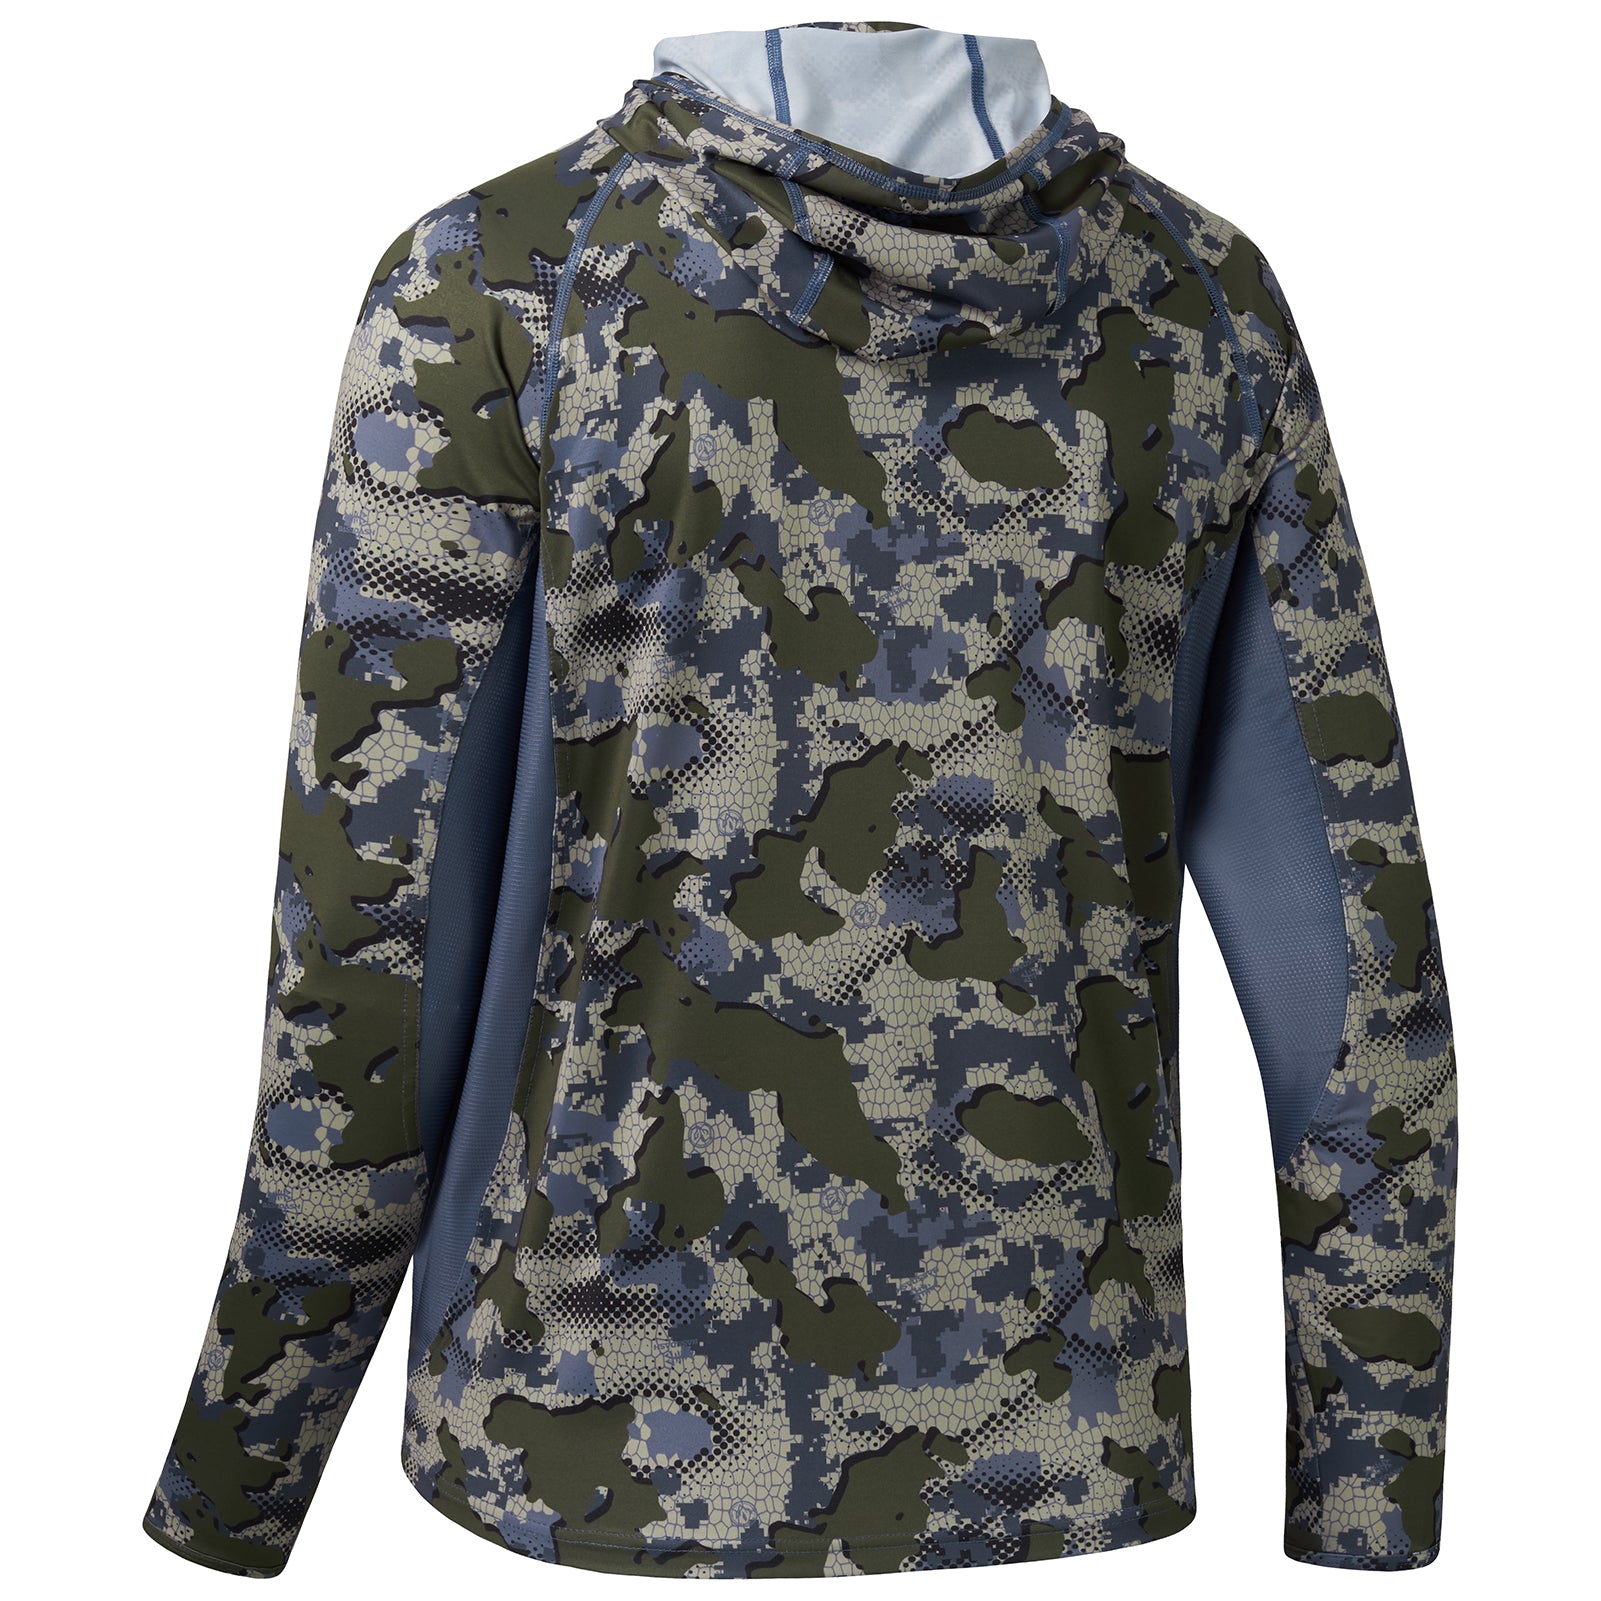 FISHEAL Men's Fishing Hoodie Shirt with 3 Pockets - Mesh Side UPF 50+ UV  Sun Protection Long Sleeve Shirts with Face Mask, Navy Camo, XX-Large :  : Clothing, Shoes & Accessories